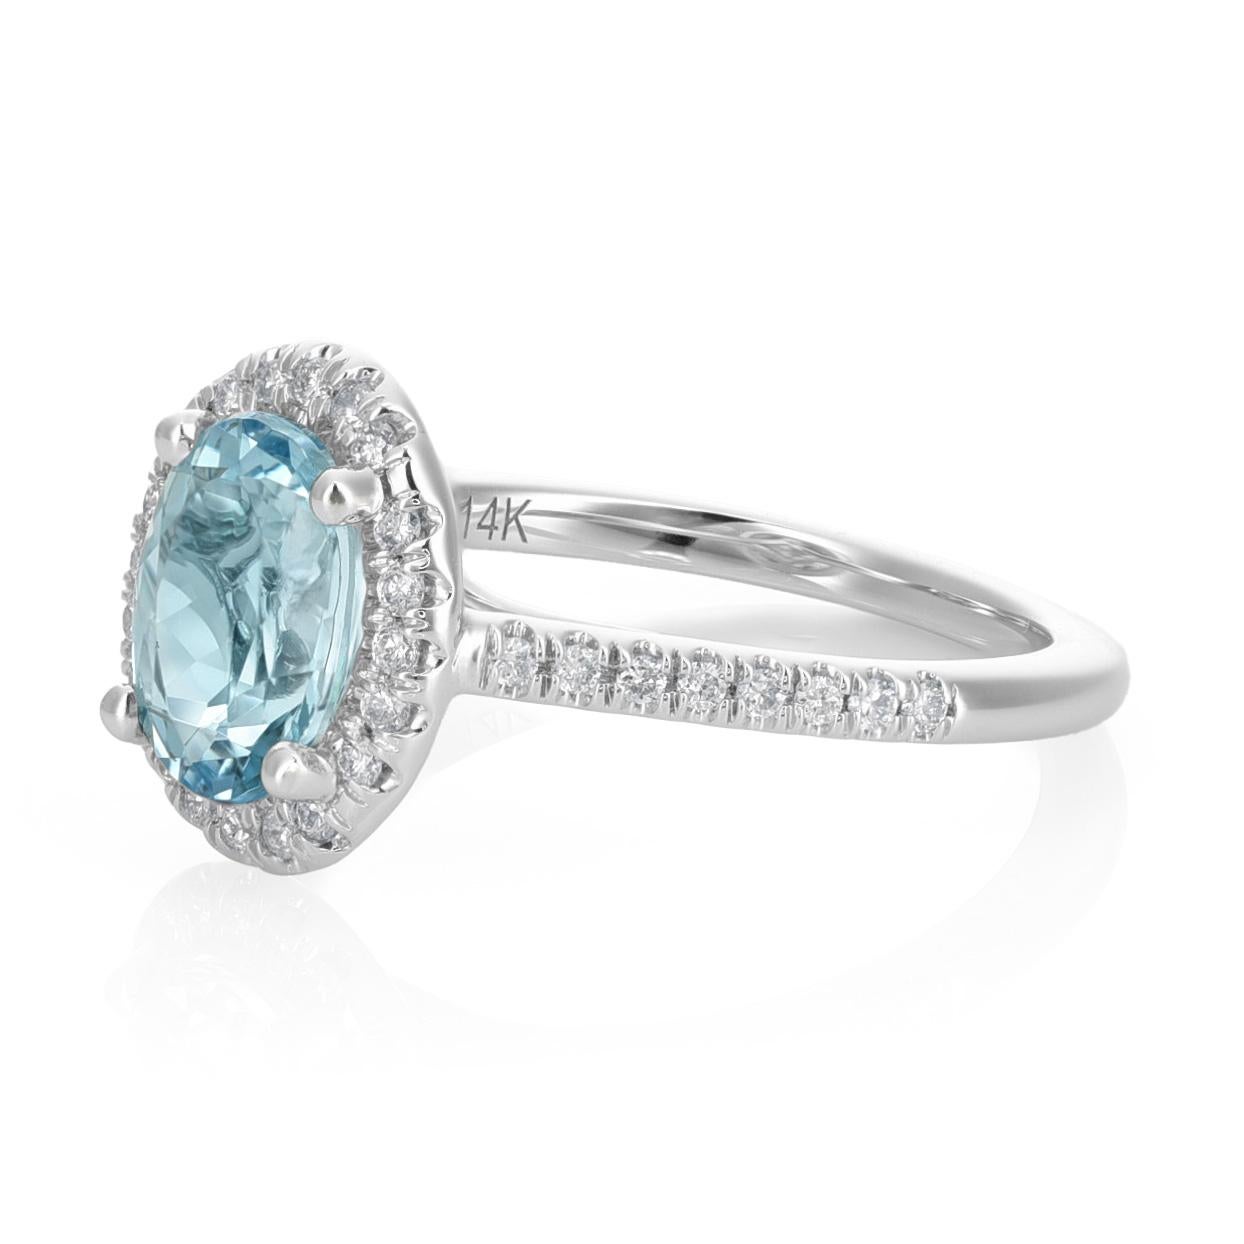 Embrace elegance with this 14K White Gold Ring featuring a 1.12 carats natural Aquamarine in a graceful oval shape. The soothing blue hue of the Aquamarine is enhanced through a heating process, adding depth to its allure. Surrounding the